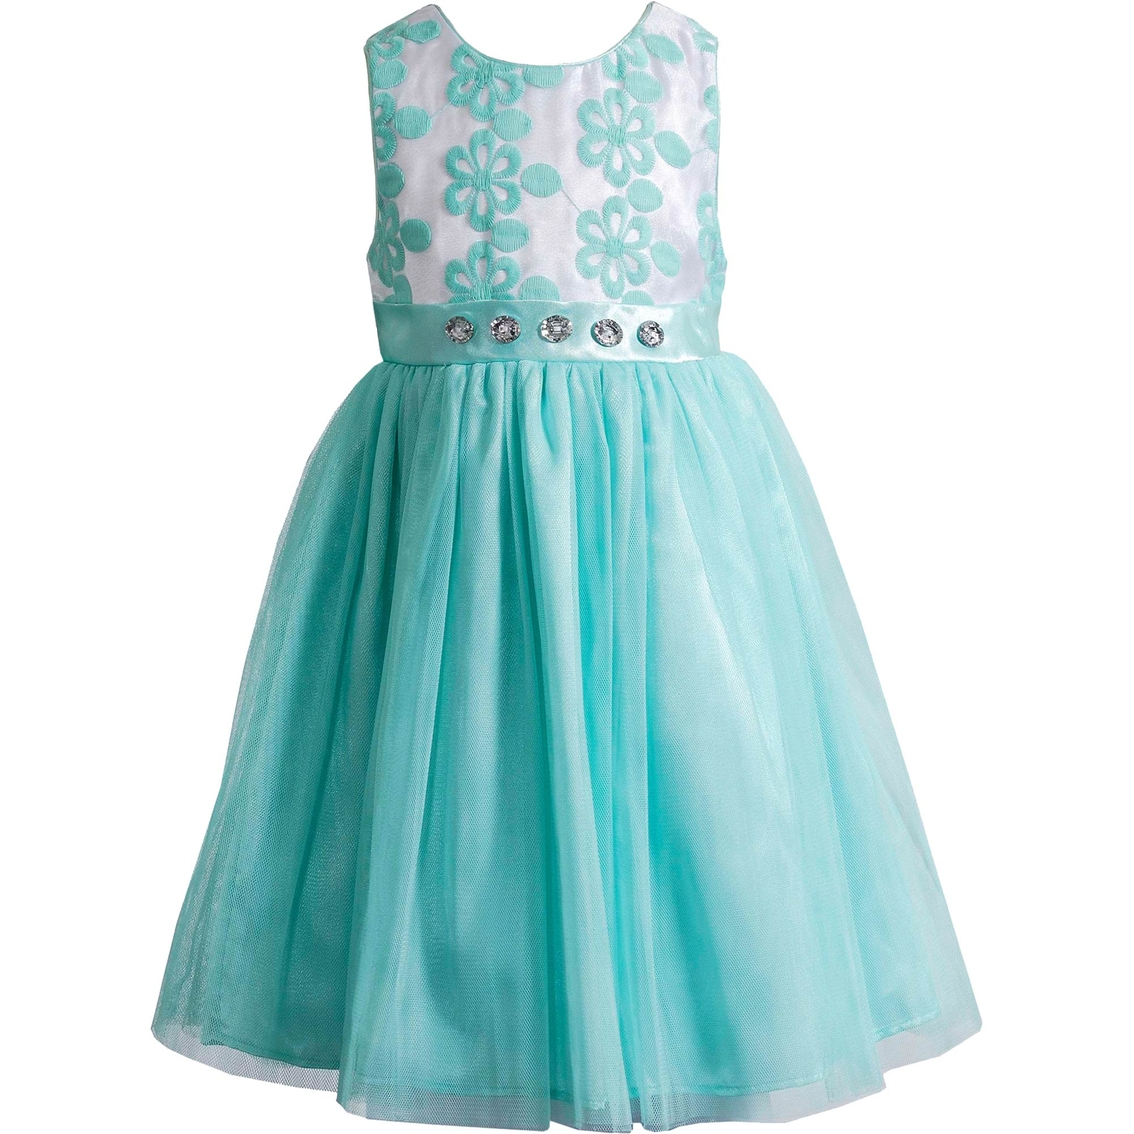 Youngland Girls Lace To Organza Dress | Dresses | Apparel | Shop The ...